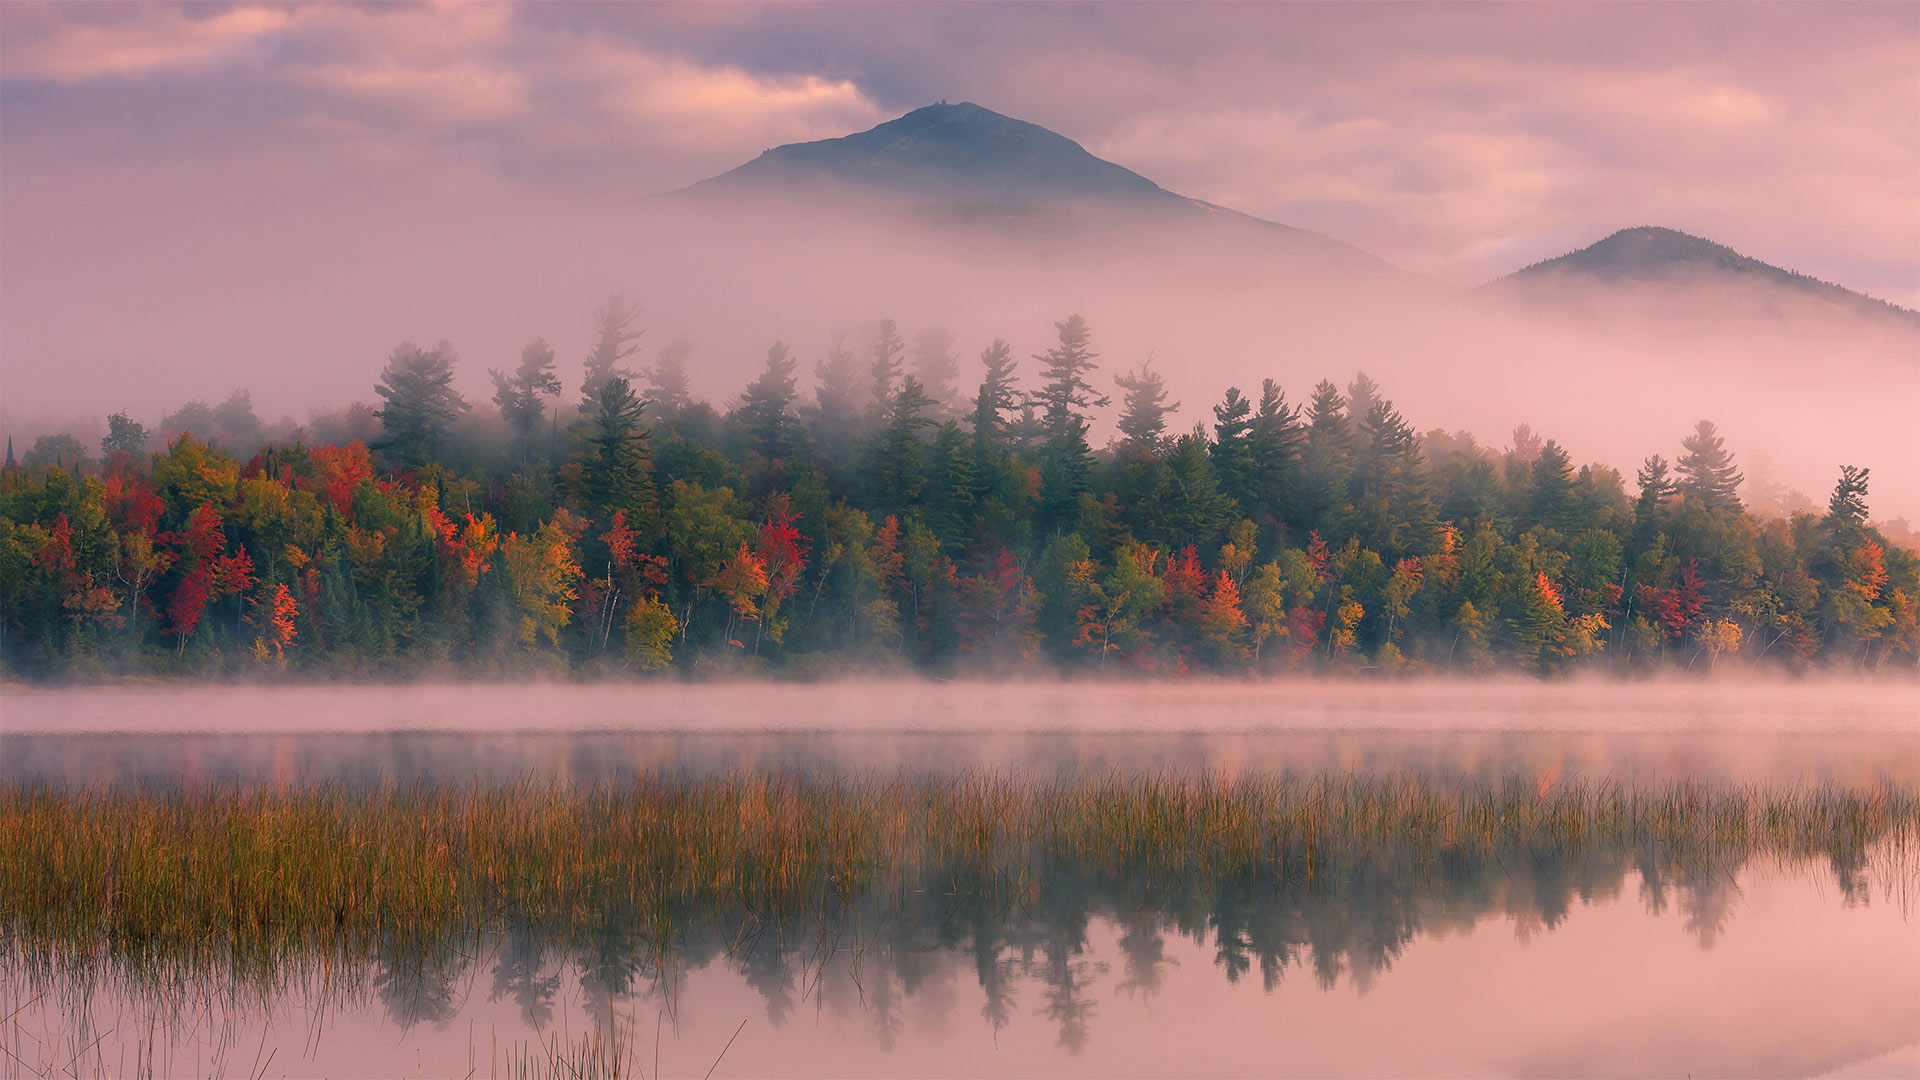 Connery Pond and Whiteface Mountain in New York state - Henk Meijer/Alamy)